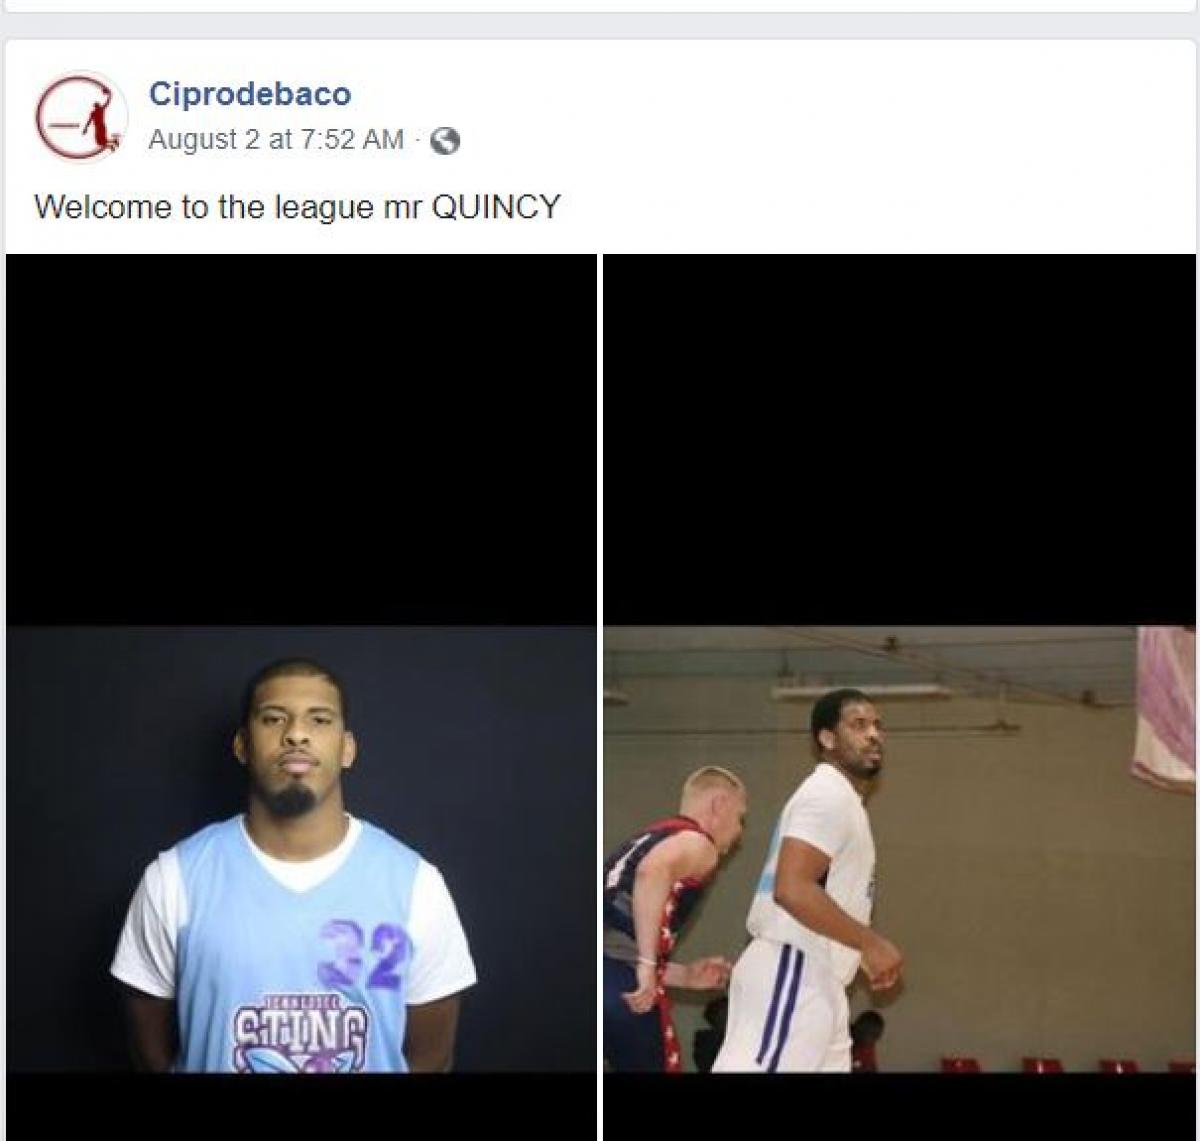 Quincy Jones signs with the Ciprodebaco League in Mexico